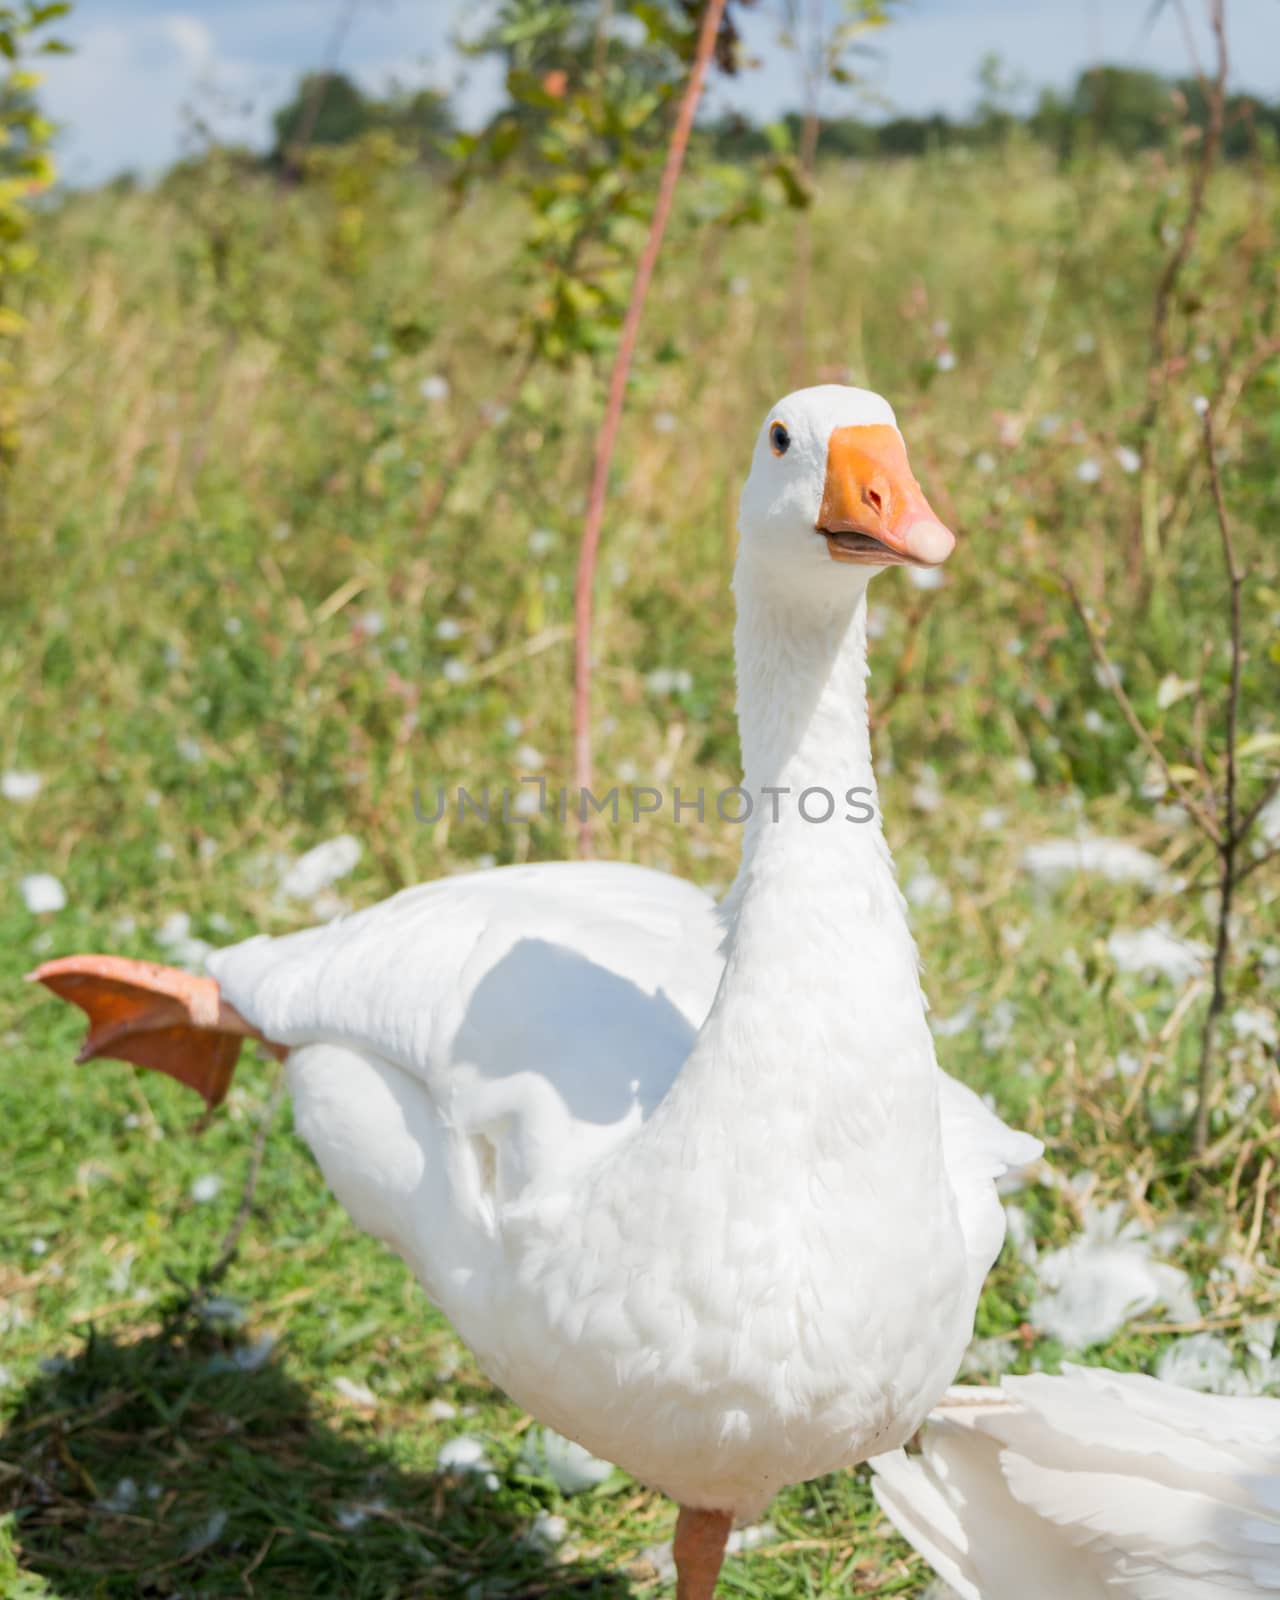 White goose standing in field on one leg